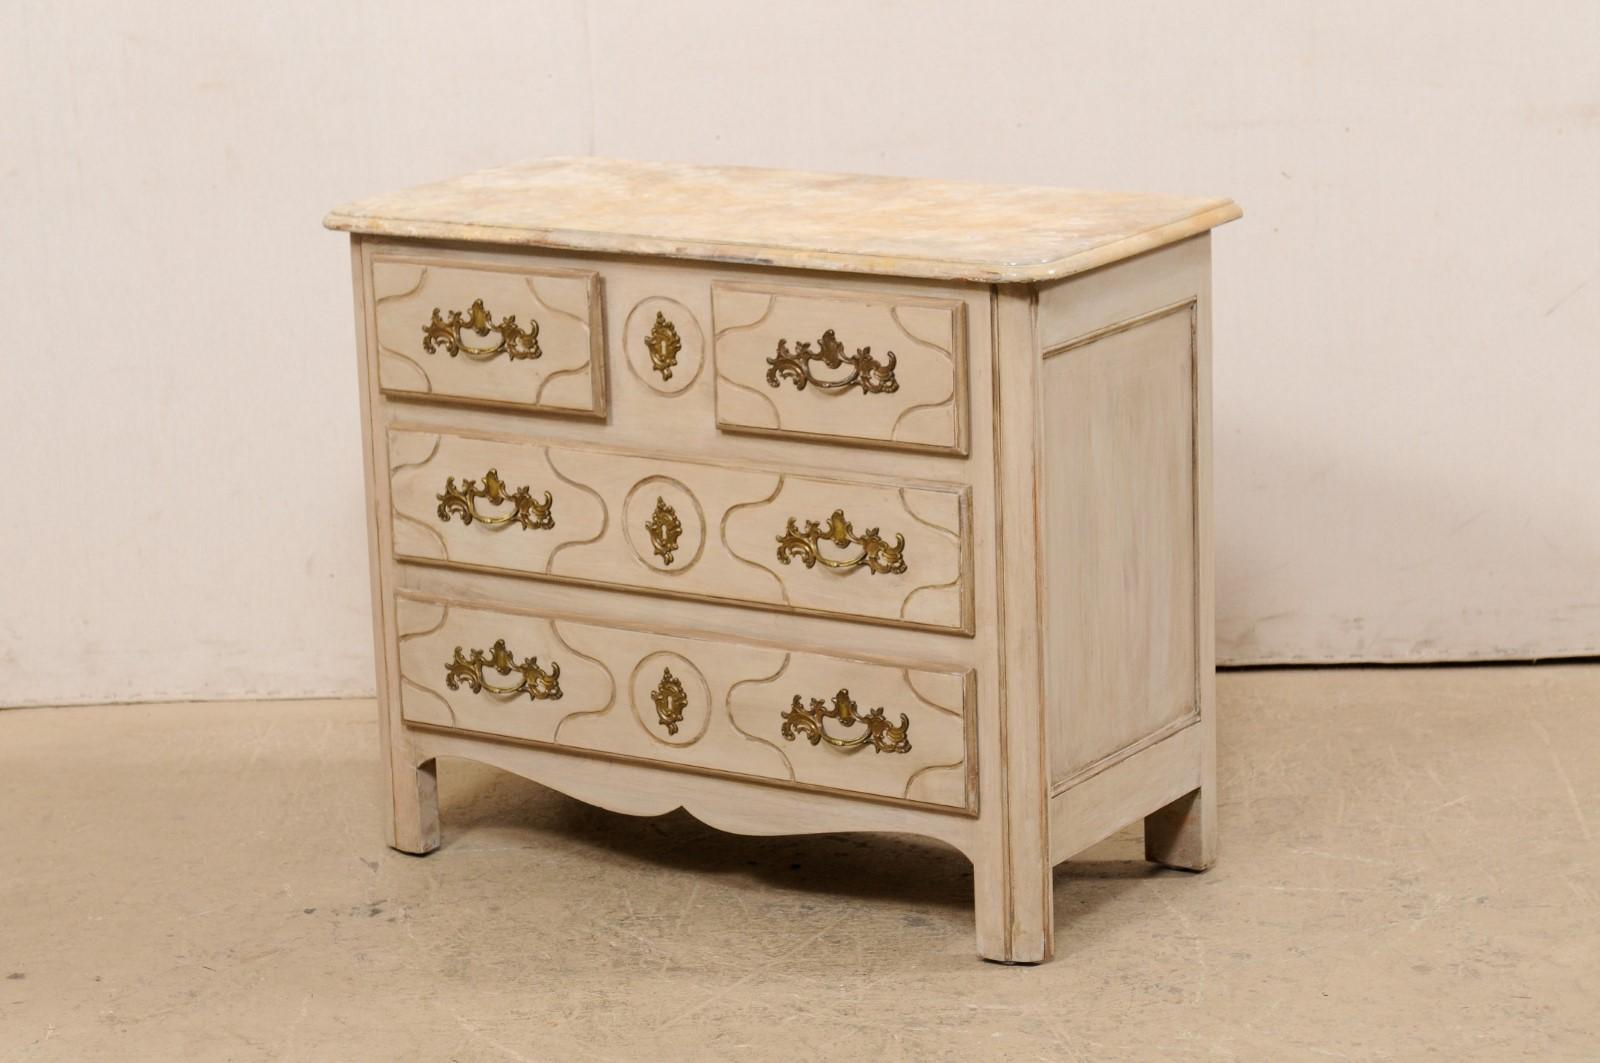 20th Century French Painted Wood Commode w/Faux Marble Top & Brass Rococo Style Hardware For Sale